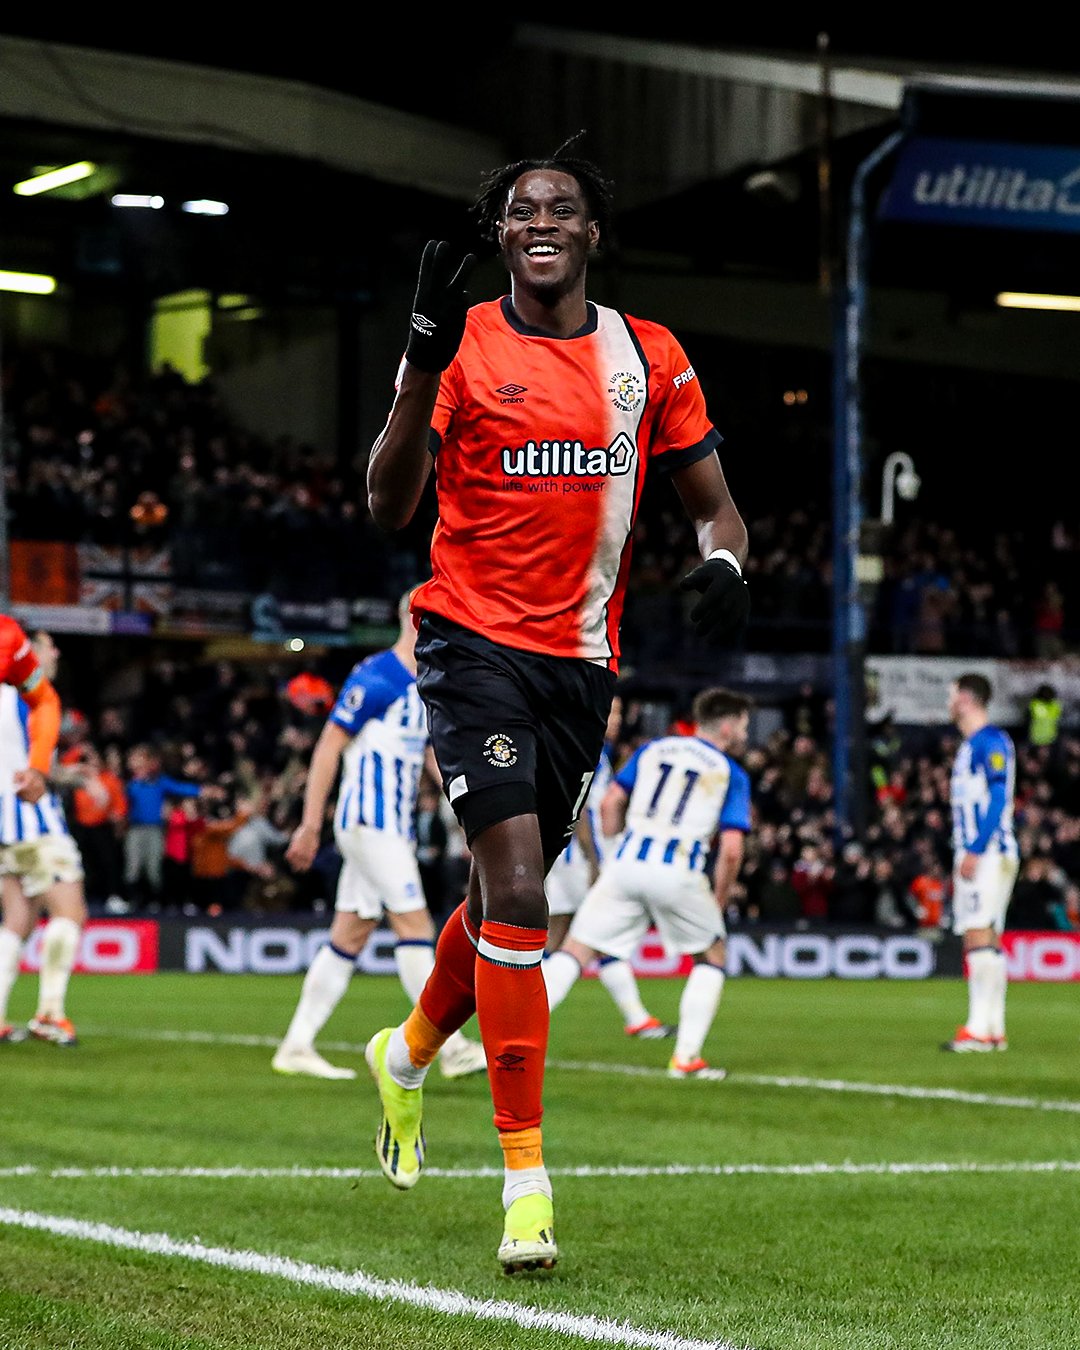 Elijah Adebayo becomes first Luton Town player to score hat-trick in EPL